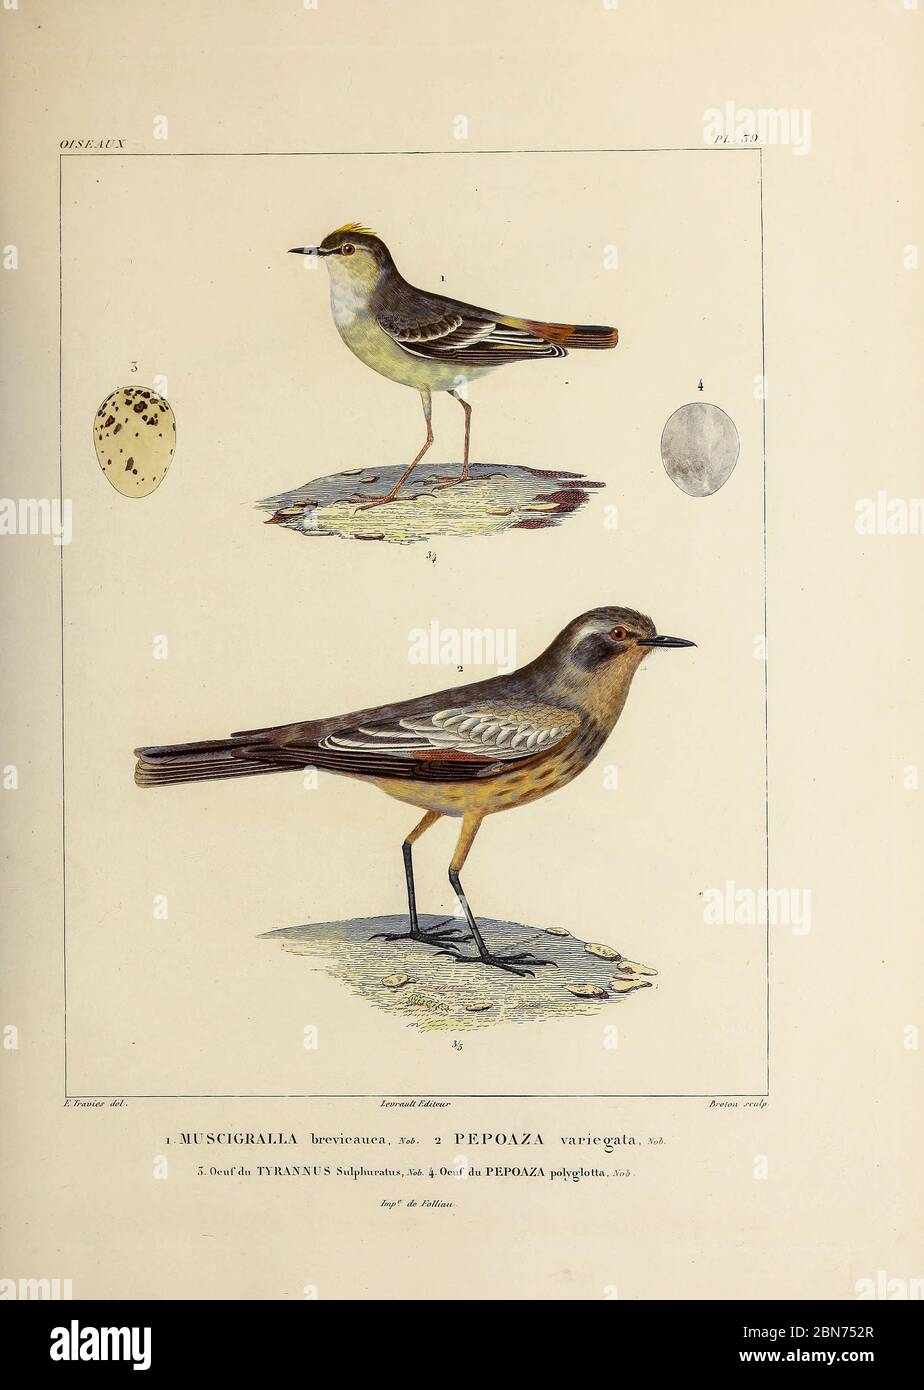 hand coloured sketch Top: Muscigralla brevicauca Bottom: chocolate-vented tyrant (Neoxolmis rufiventris [Here as Pepoaza variegata]) From the book 'Voyage dans l'Amérique Méridionale' [Journey to South America: (Brazil, the eastern republic of Uruguay, the Argentine Republic, Patagonia, the republic of Chile, the republic of Bolivia, the republic of Peru), executed during the years 1826 - 1833] 4th volume Part 3 By: Orbigny, Alcide Dessalines d', d'Orbigny, 1802-1857; Montagne, Jean François Camille, 1784-1866; Martius, Karl Friedrich Philipp von, 1794-1868 Published Paris :Chez Pitois-Levrau Stock Photo